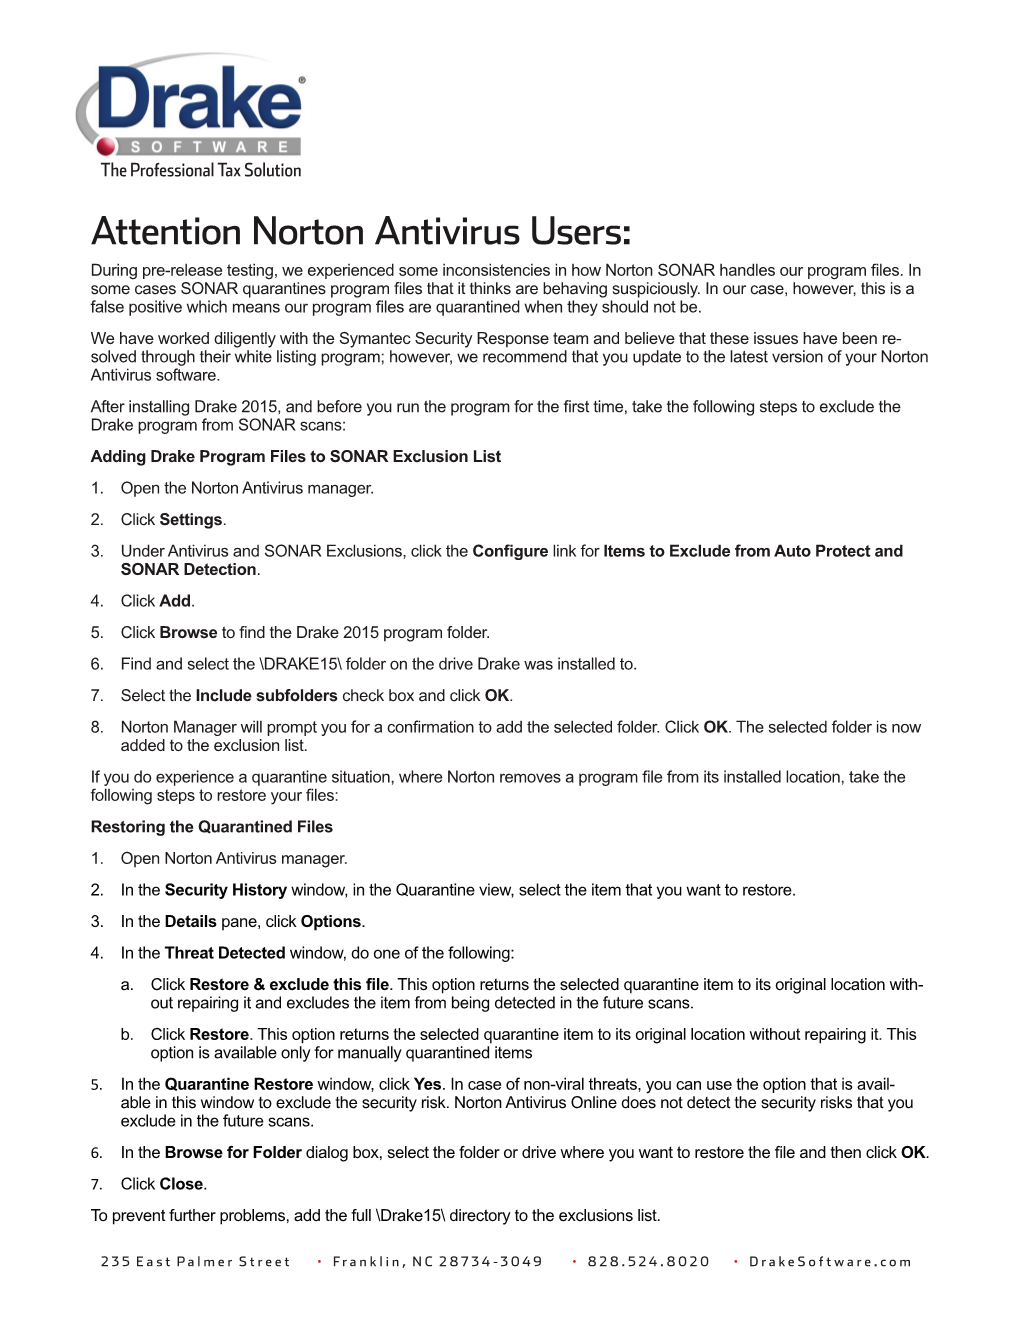 Attention Norton Antivirus Users: During Pre-Release Testing, We Experienced Some Inconsistencies in How Norton SONAR Handles Our Program Files